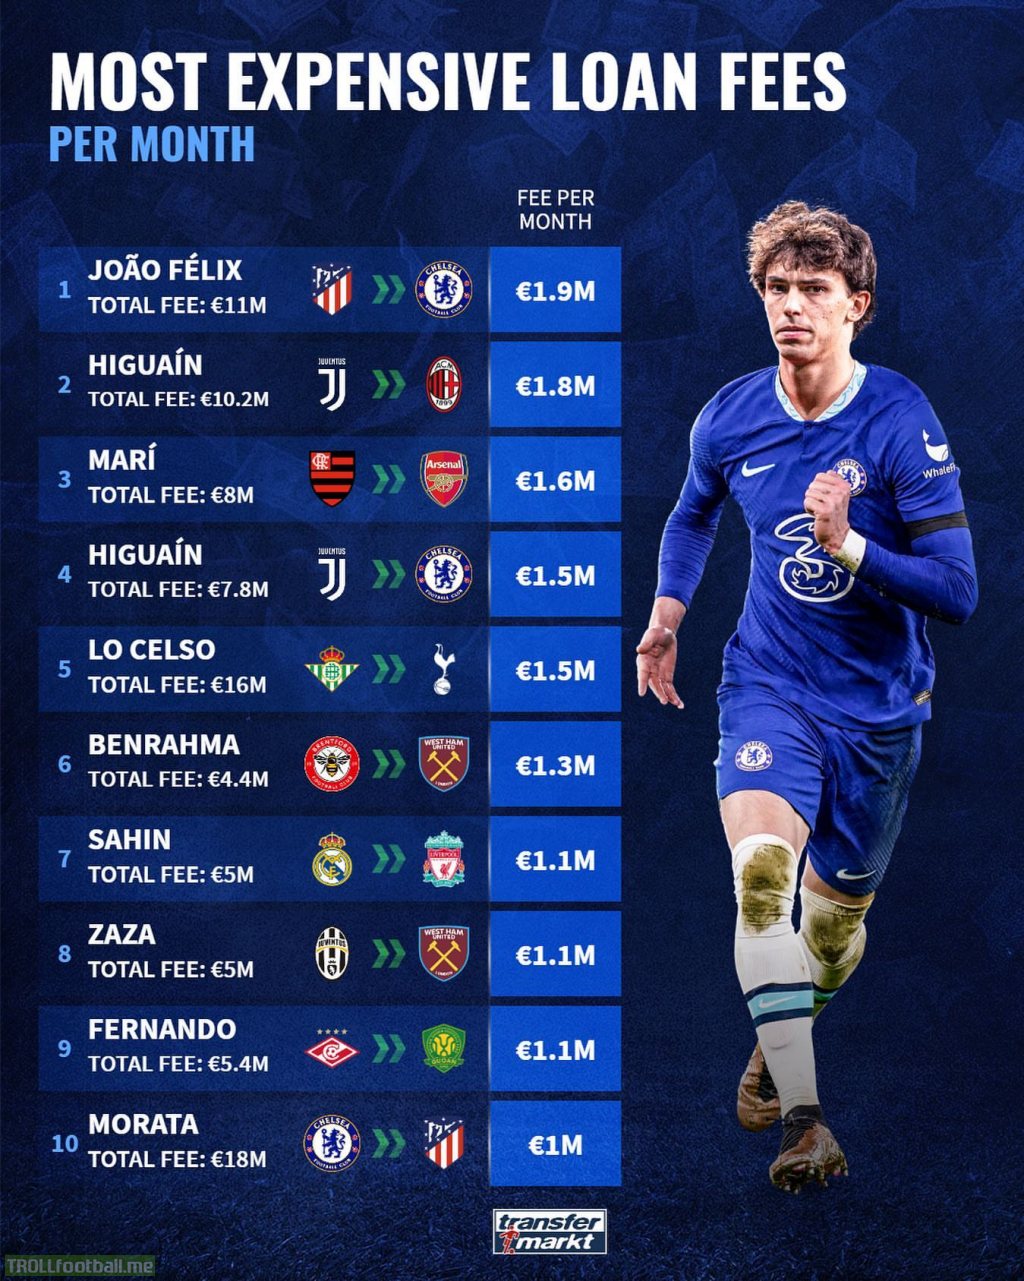 Most expensive loan fees per month in history